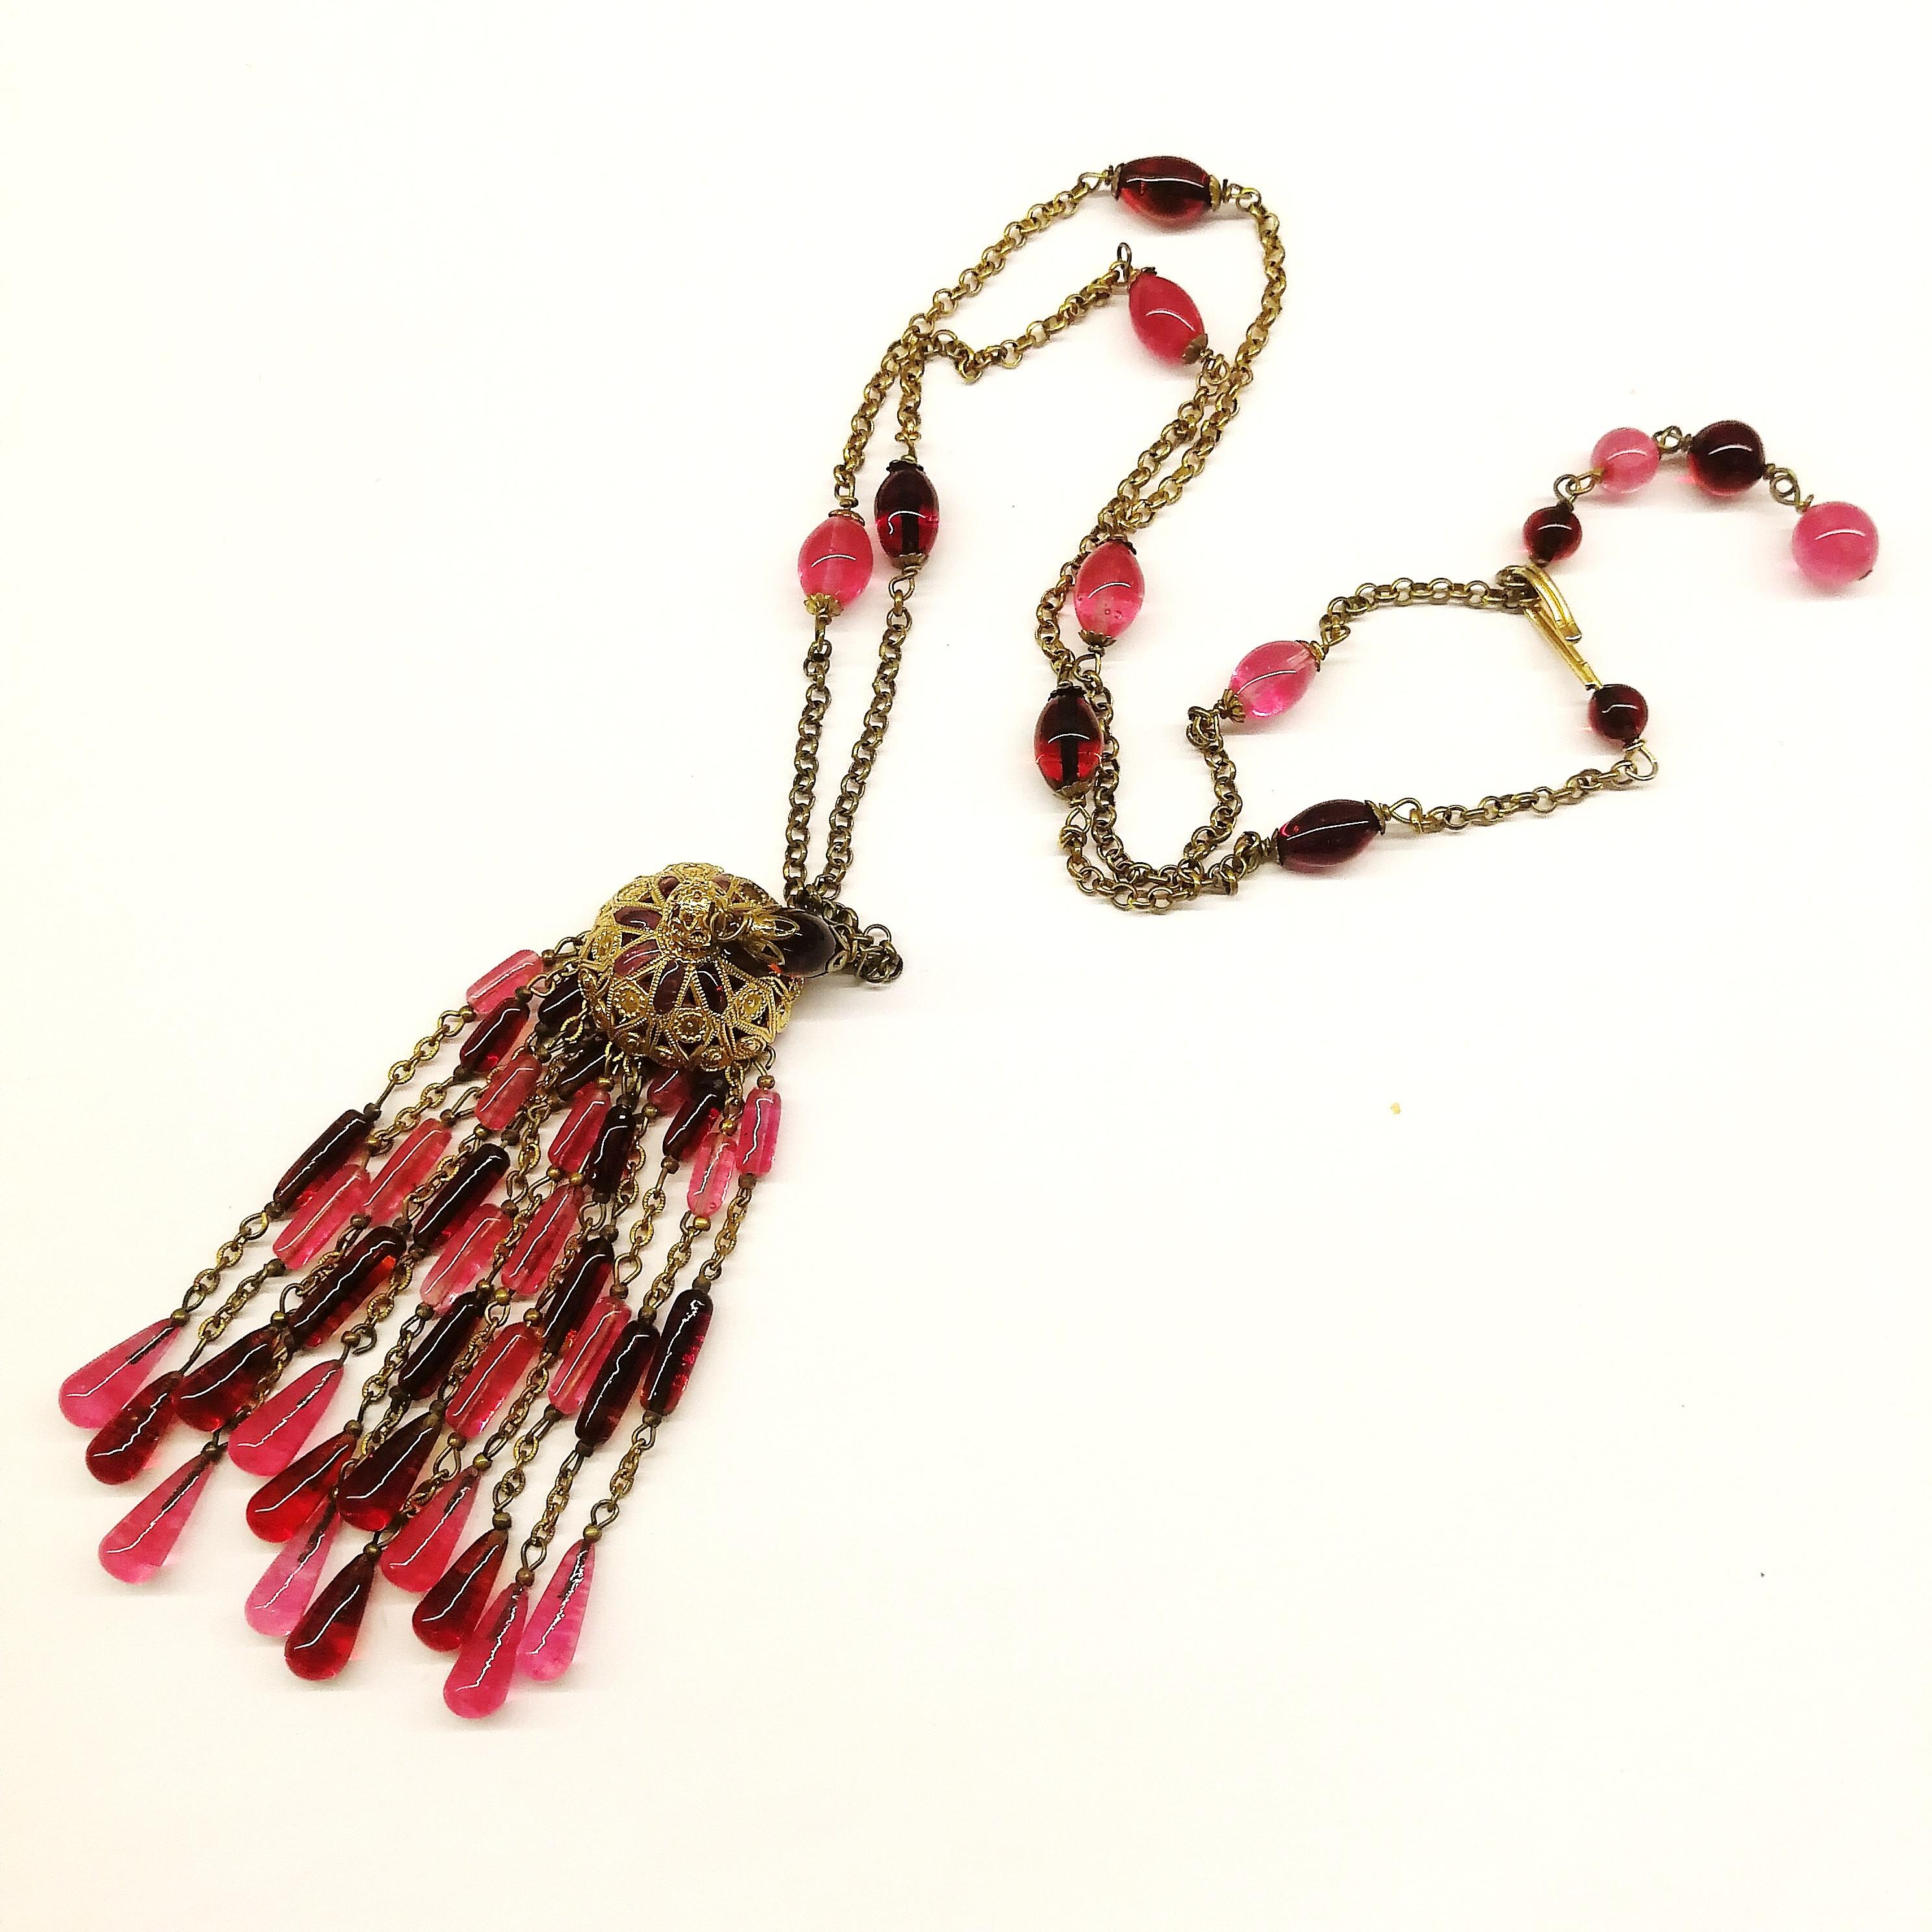 A beautiful, elegant ruby/cranberry poured glass necklace, a sautoir with a rich tassel pendant, crowned with a gilt filigree and poured glass cap, it is made by haute couture artisans, Maison Gripoix, in the 1960s, with fine, delicate workmanship